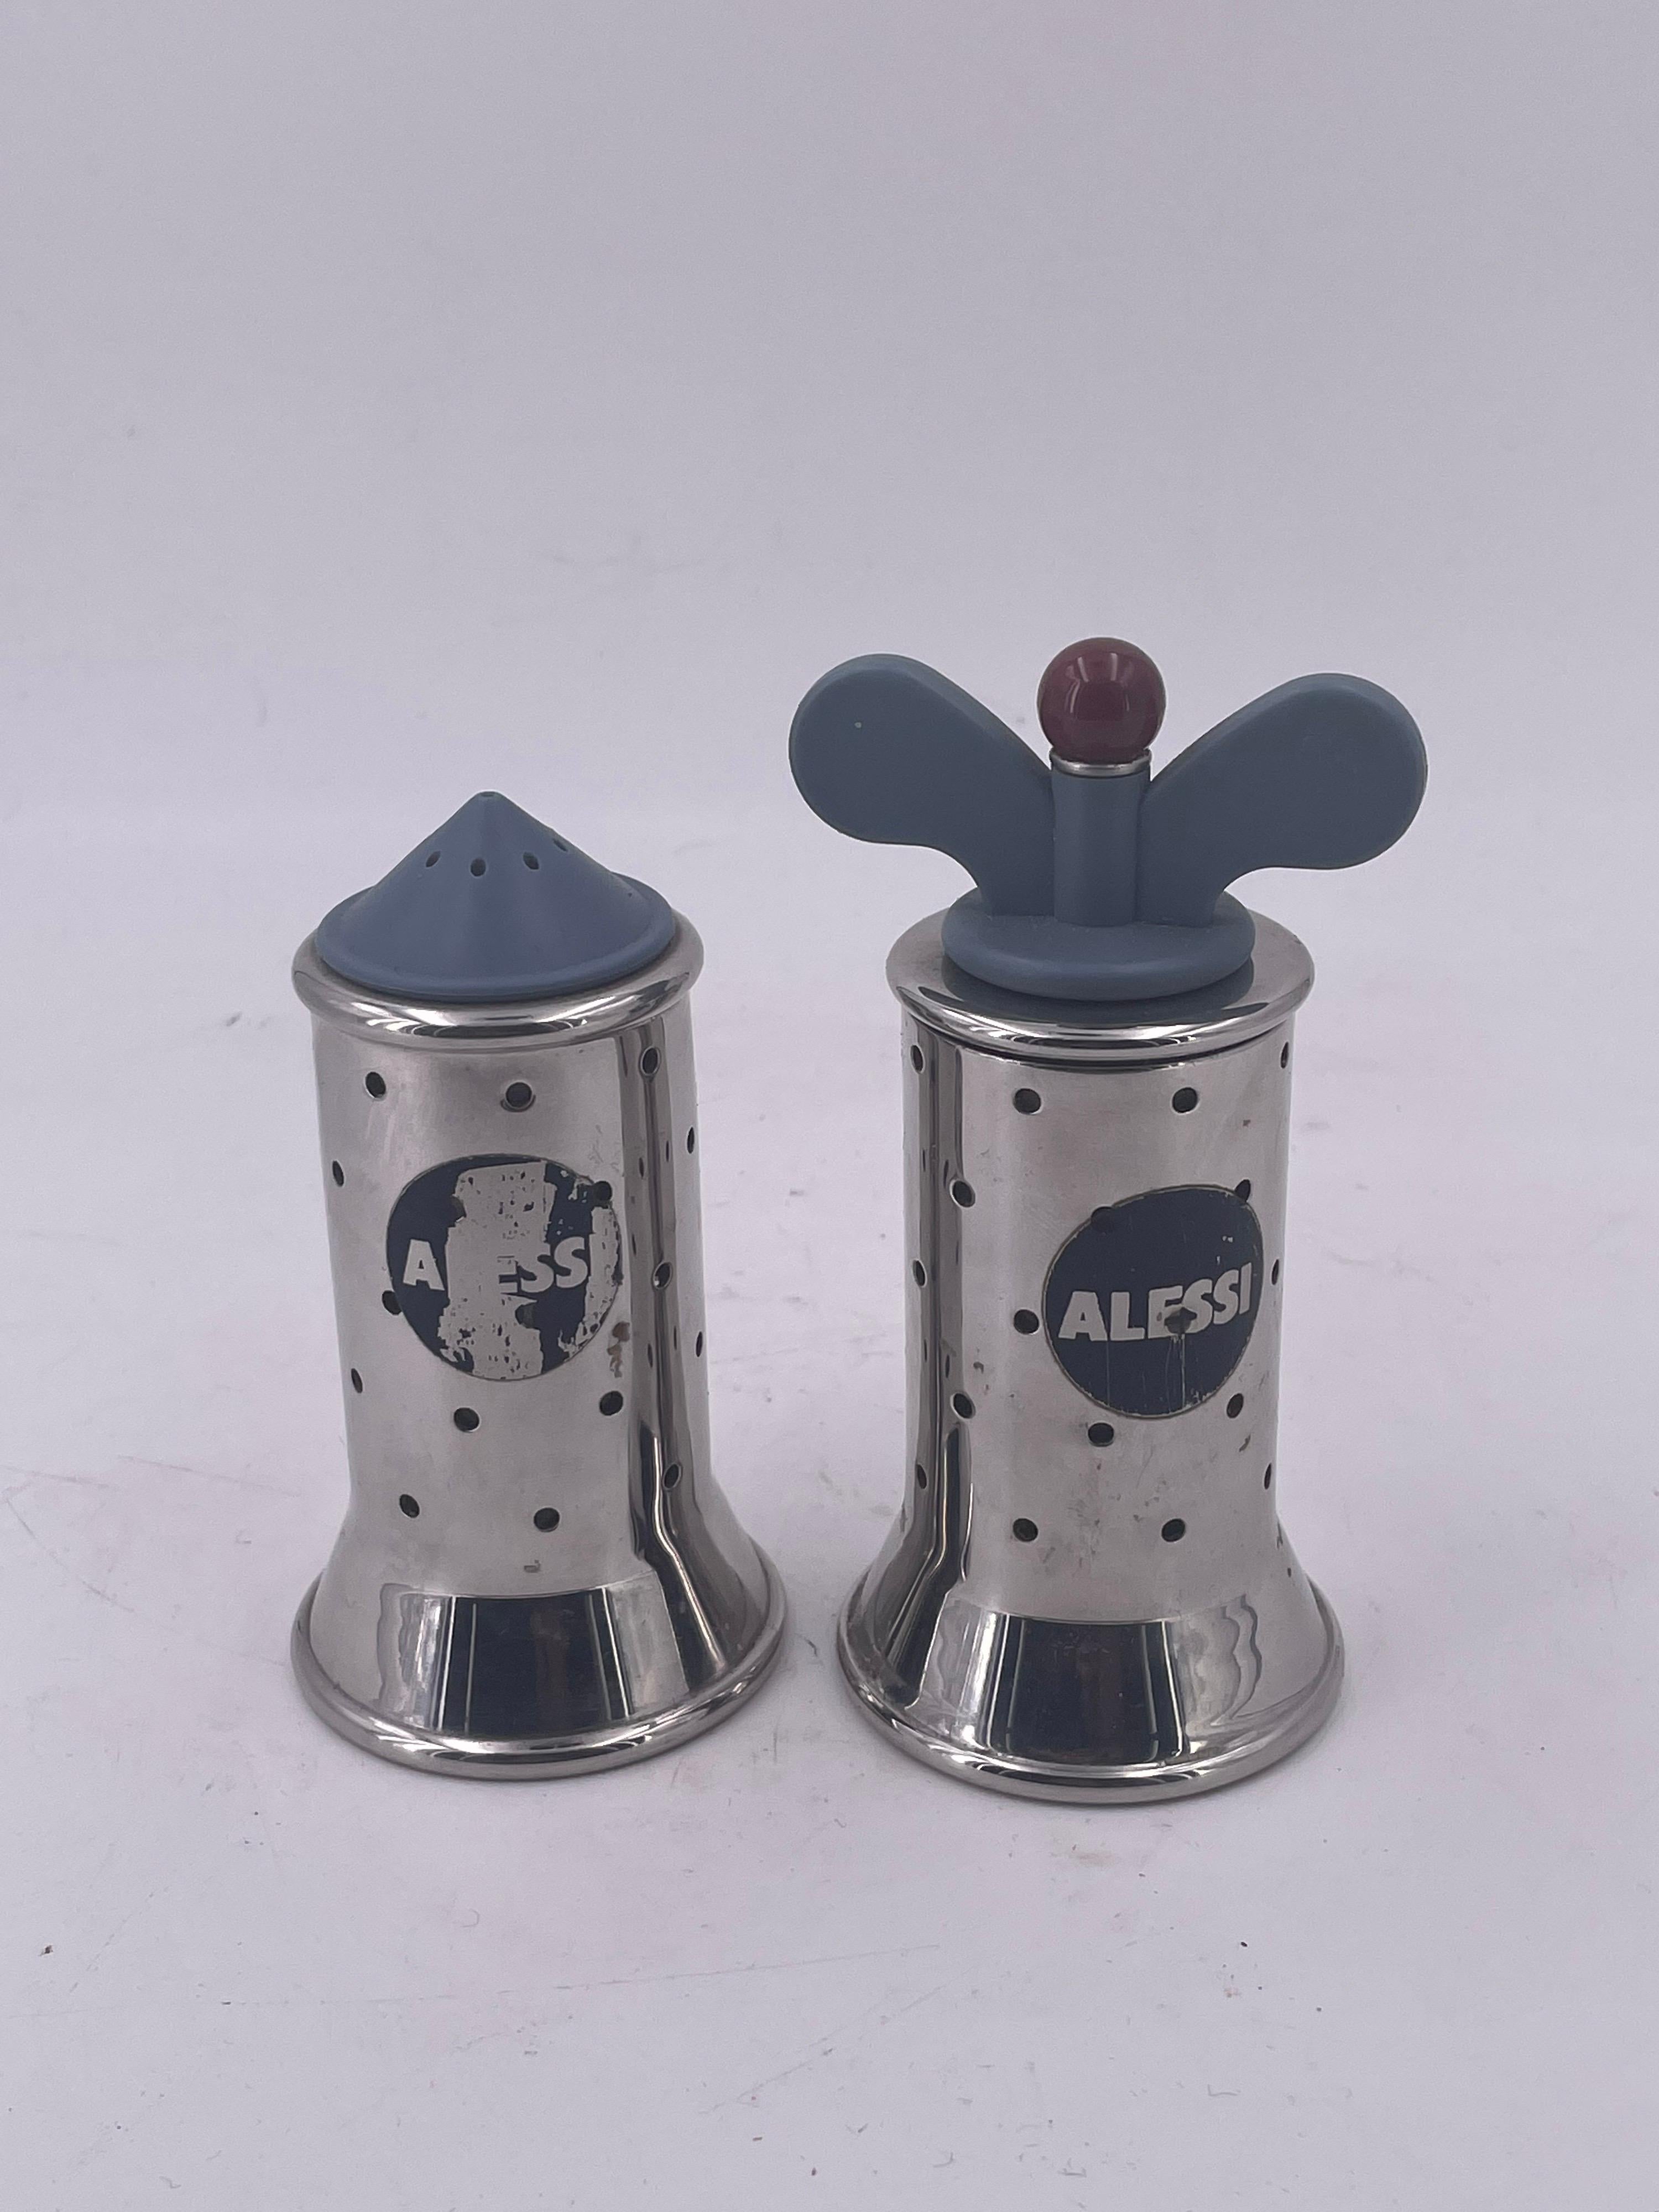 alessi salt and pepper shakers